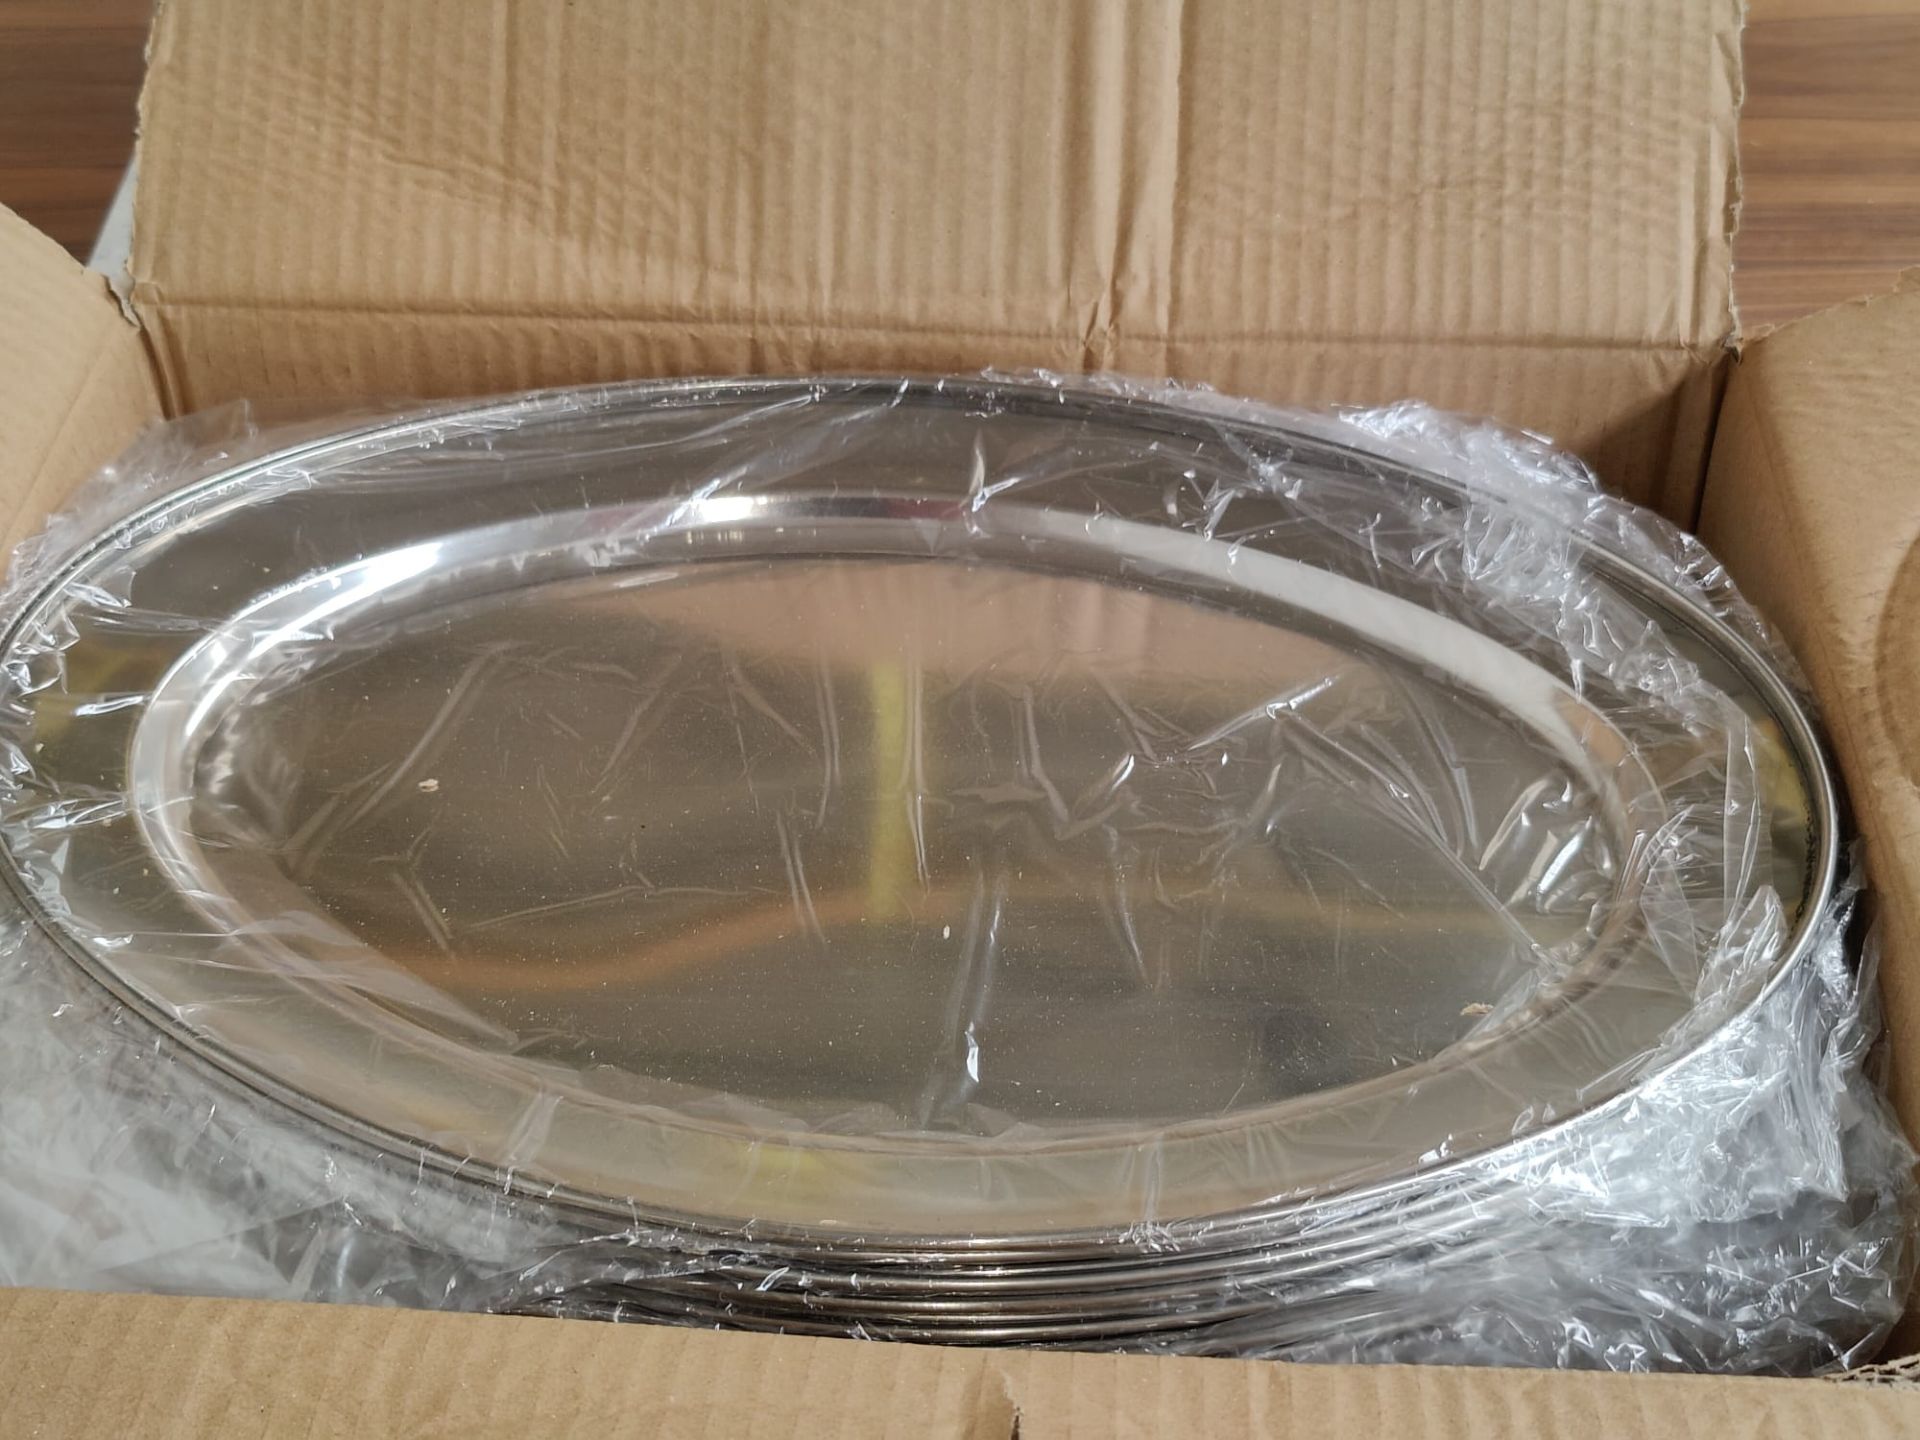 20 x Stainless Steel Oval Service Trays - Size: 450mm x 310mm - Brand New Boxed Stock - RRP £200 - - Image 4 of 8